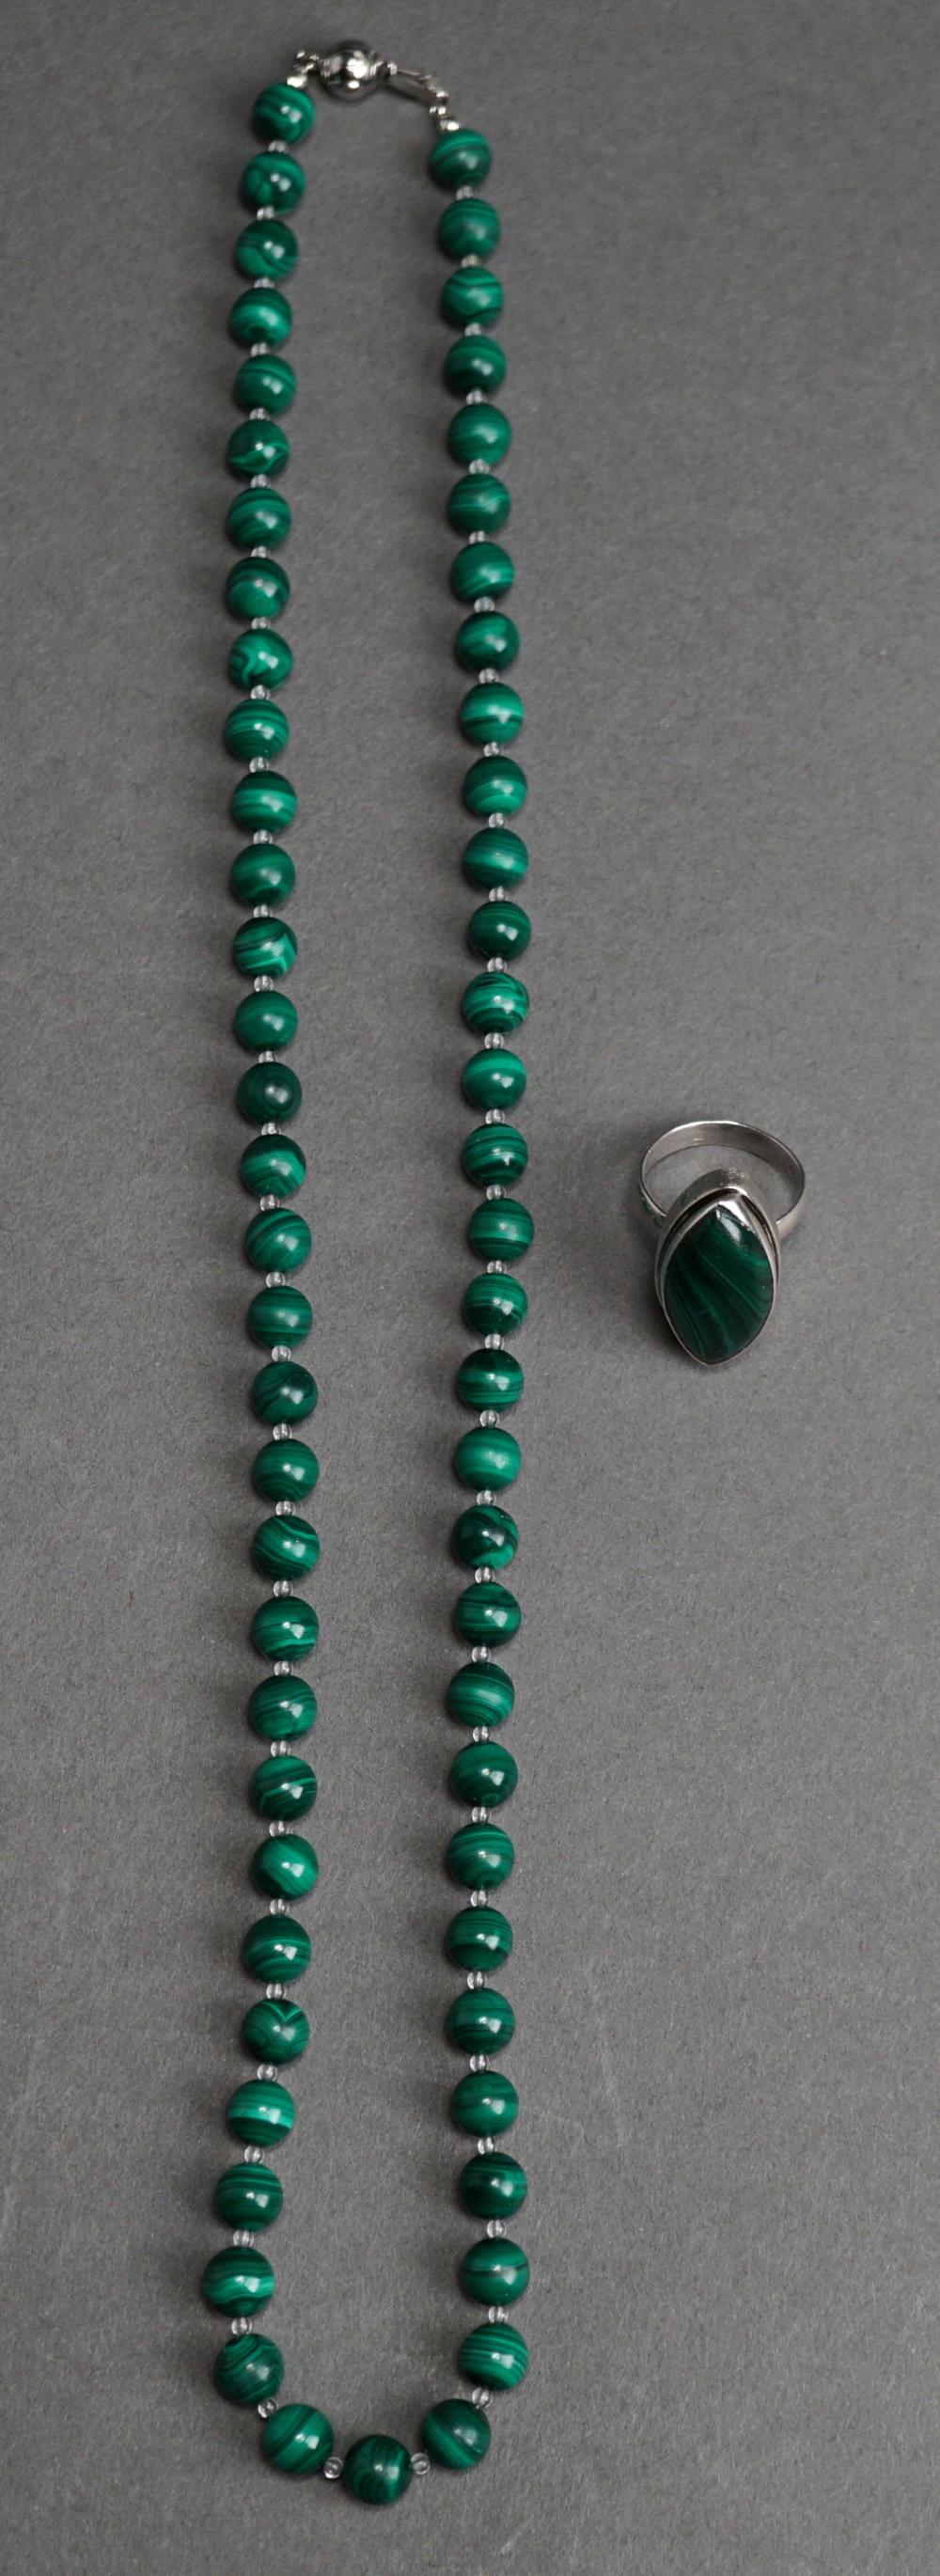 MALACHITE BEADED NECKLACE WITH